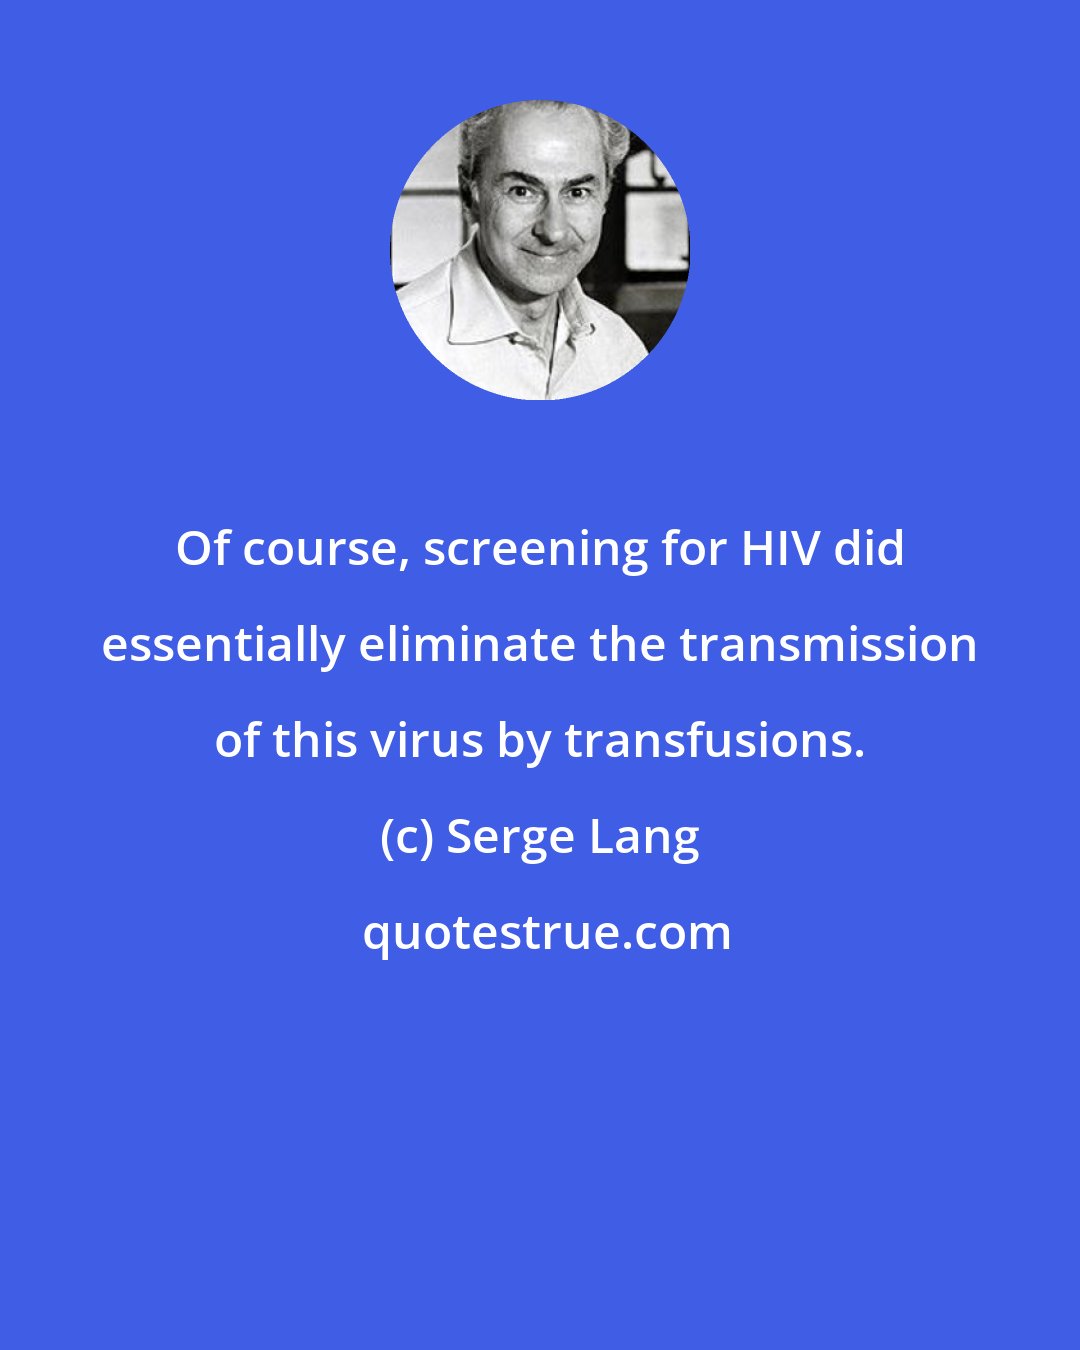 Serge Lang: Of course, screening for HIV did essentially eliminate the transmission of this virus by transfusions.